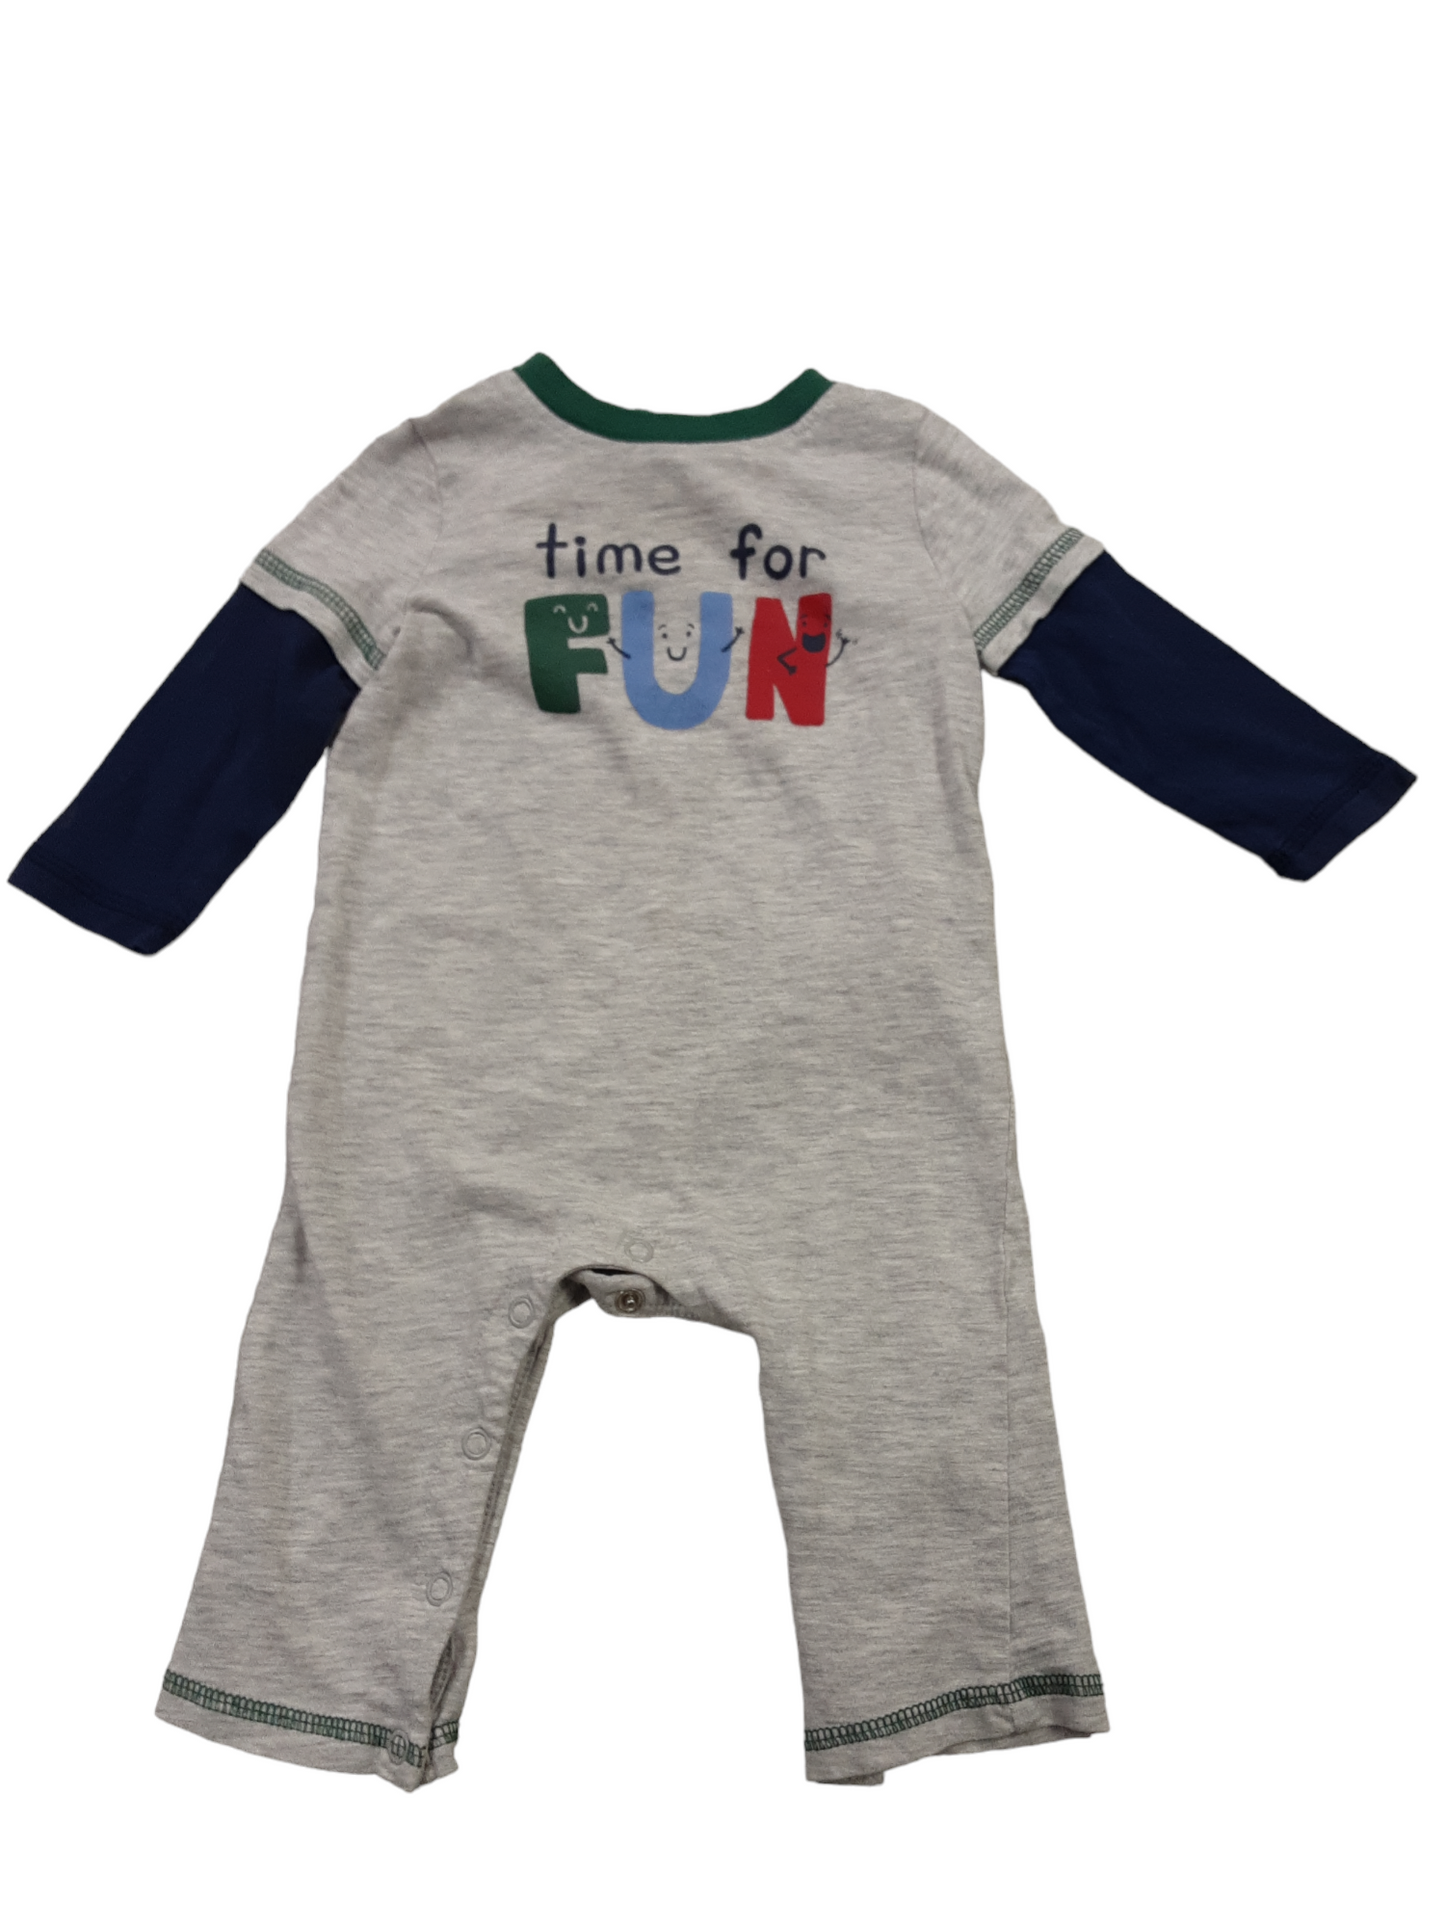 Time for Fun Romper size 3-6months